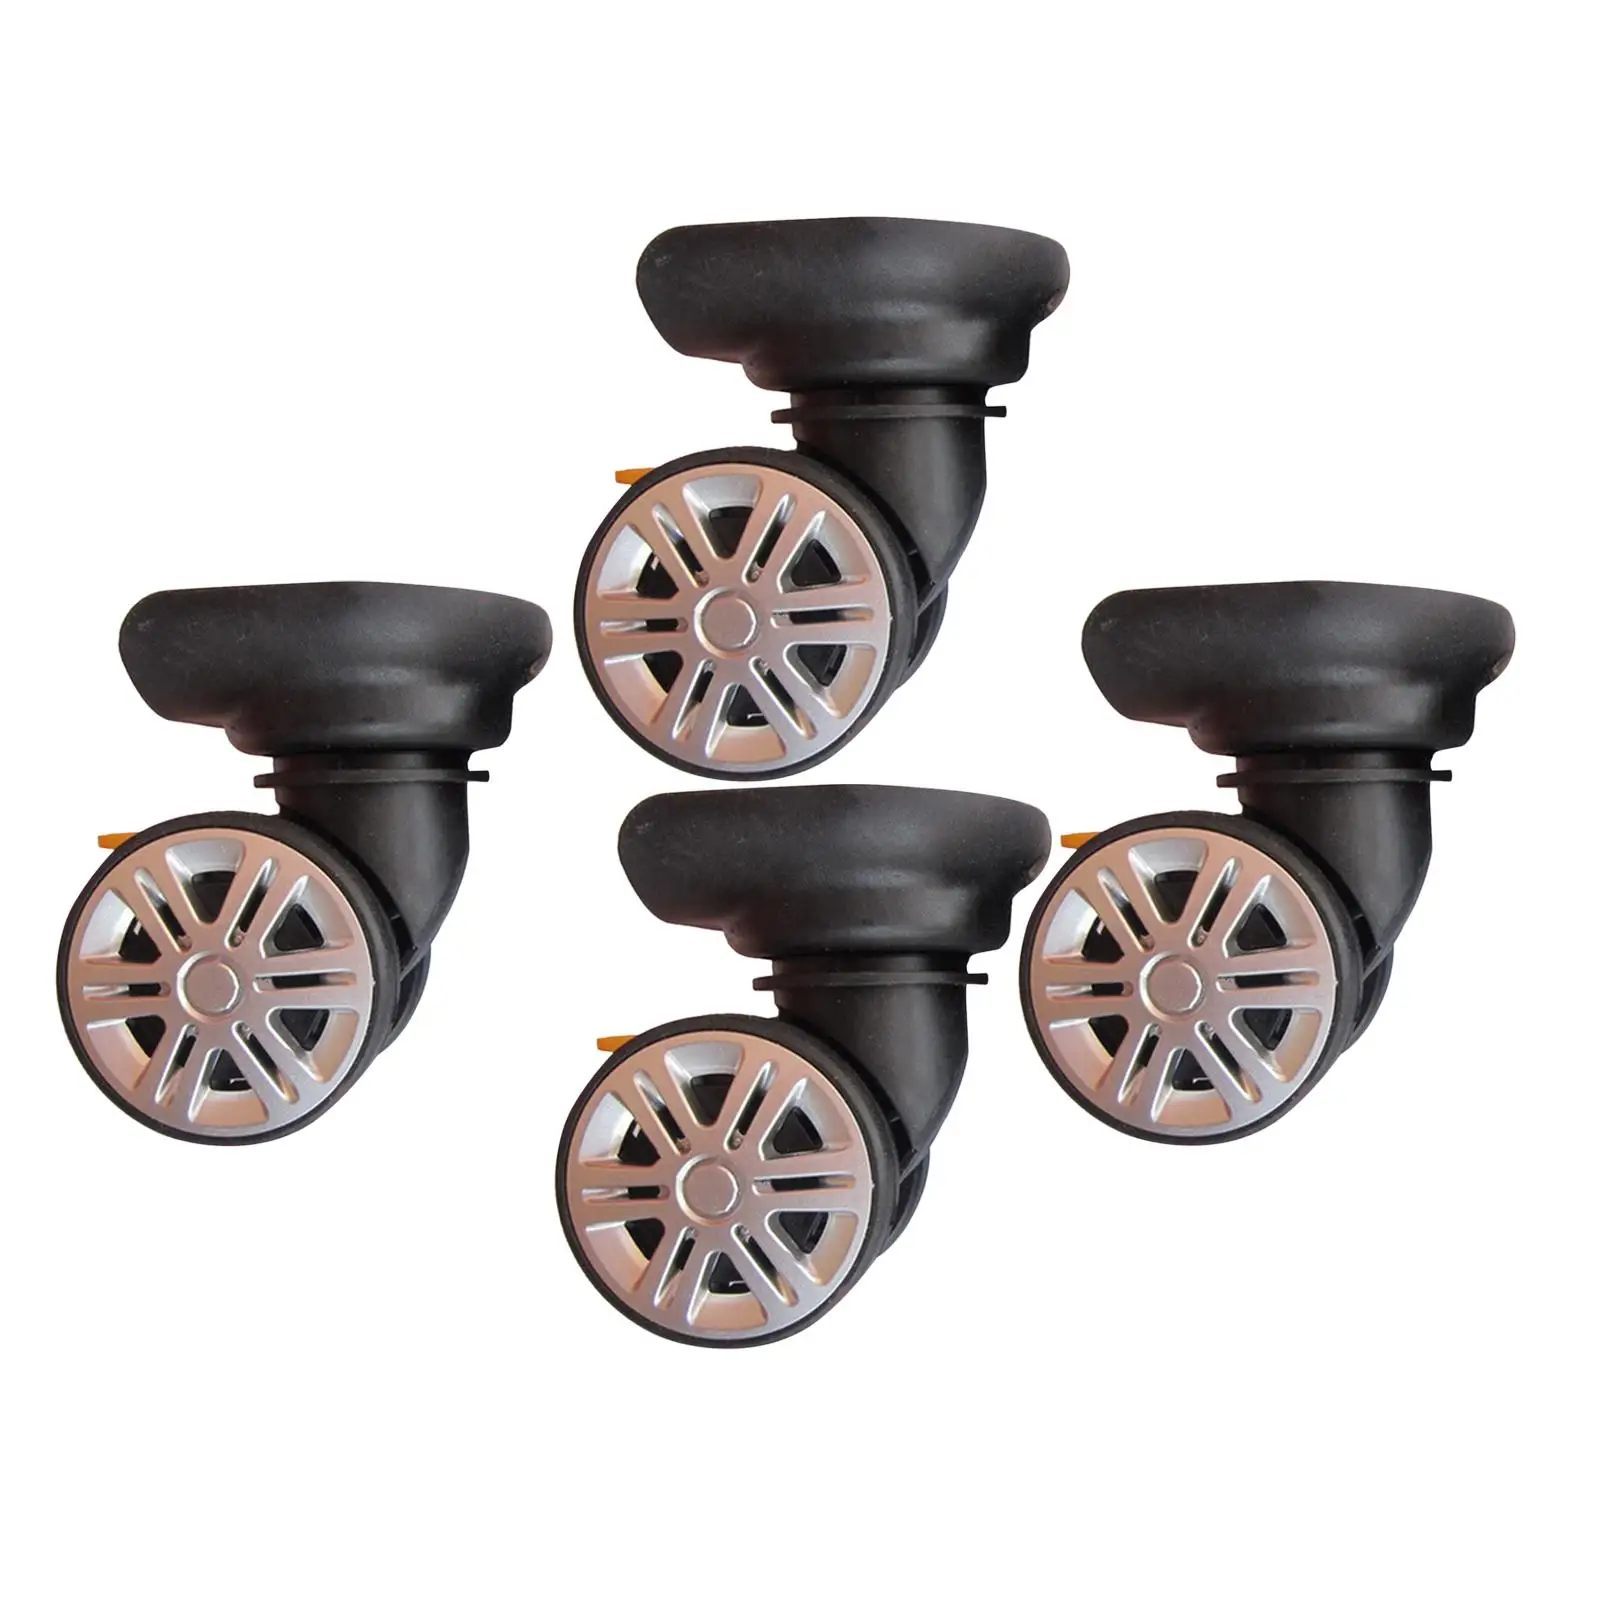 4 Pieces Suitcase Replacement Wheels Silent Lightweight Suitcase Swivel Wheels for Shopping Carts Trolley Case Suitcases